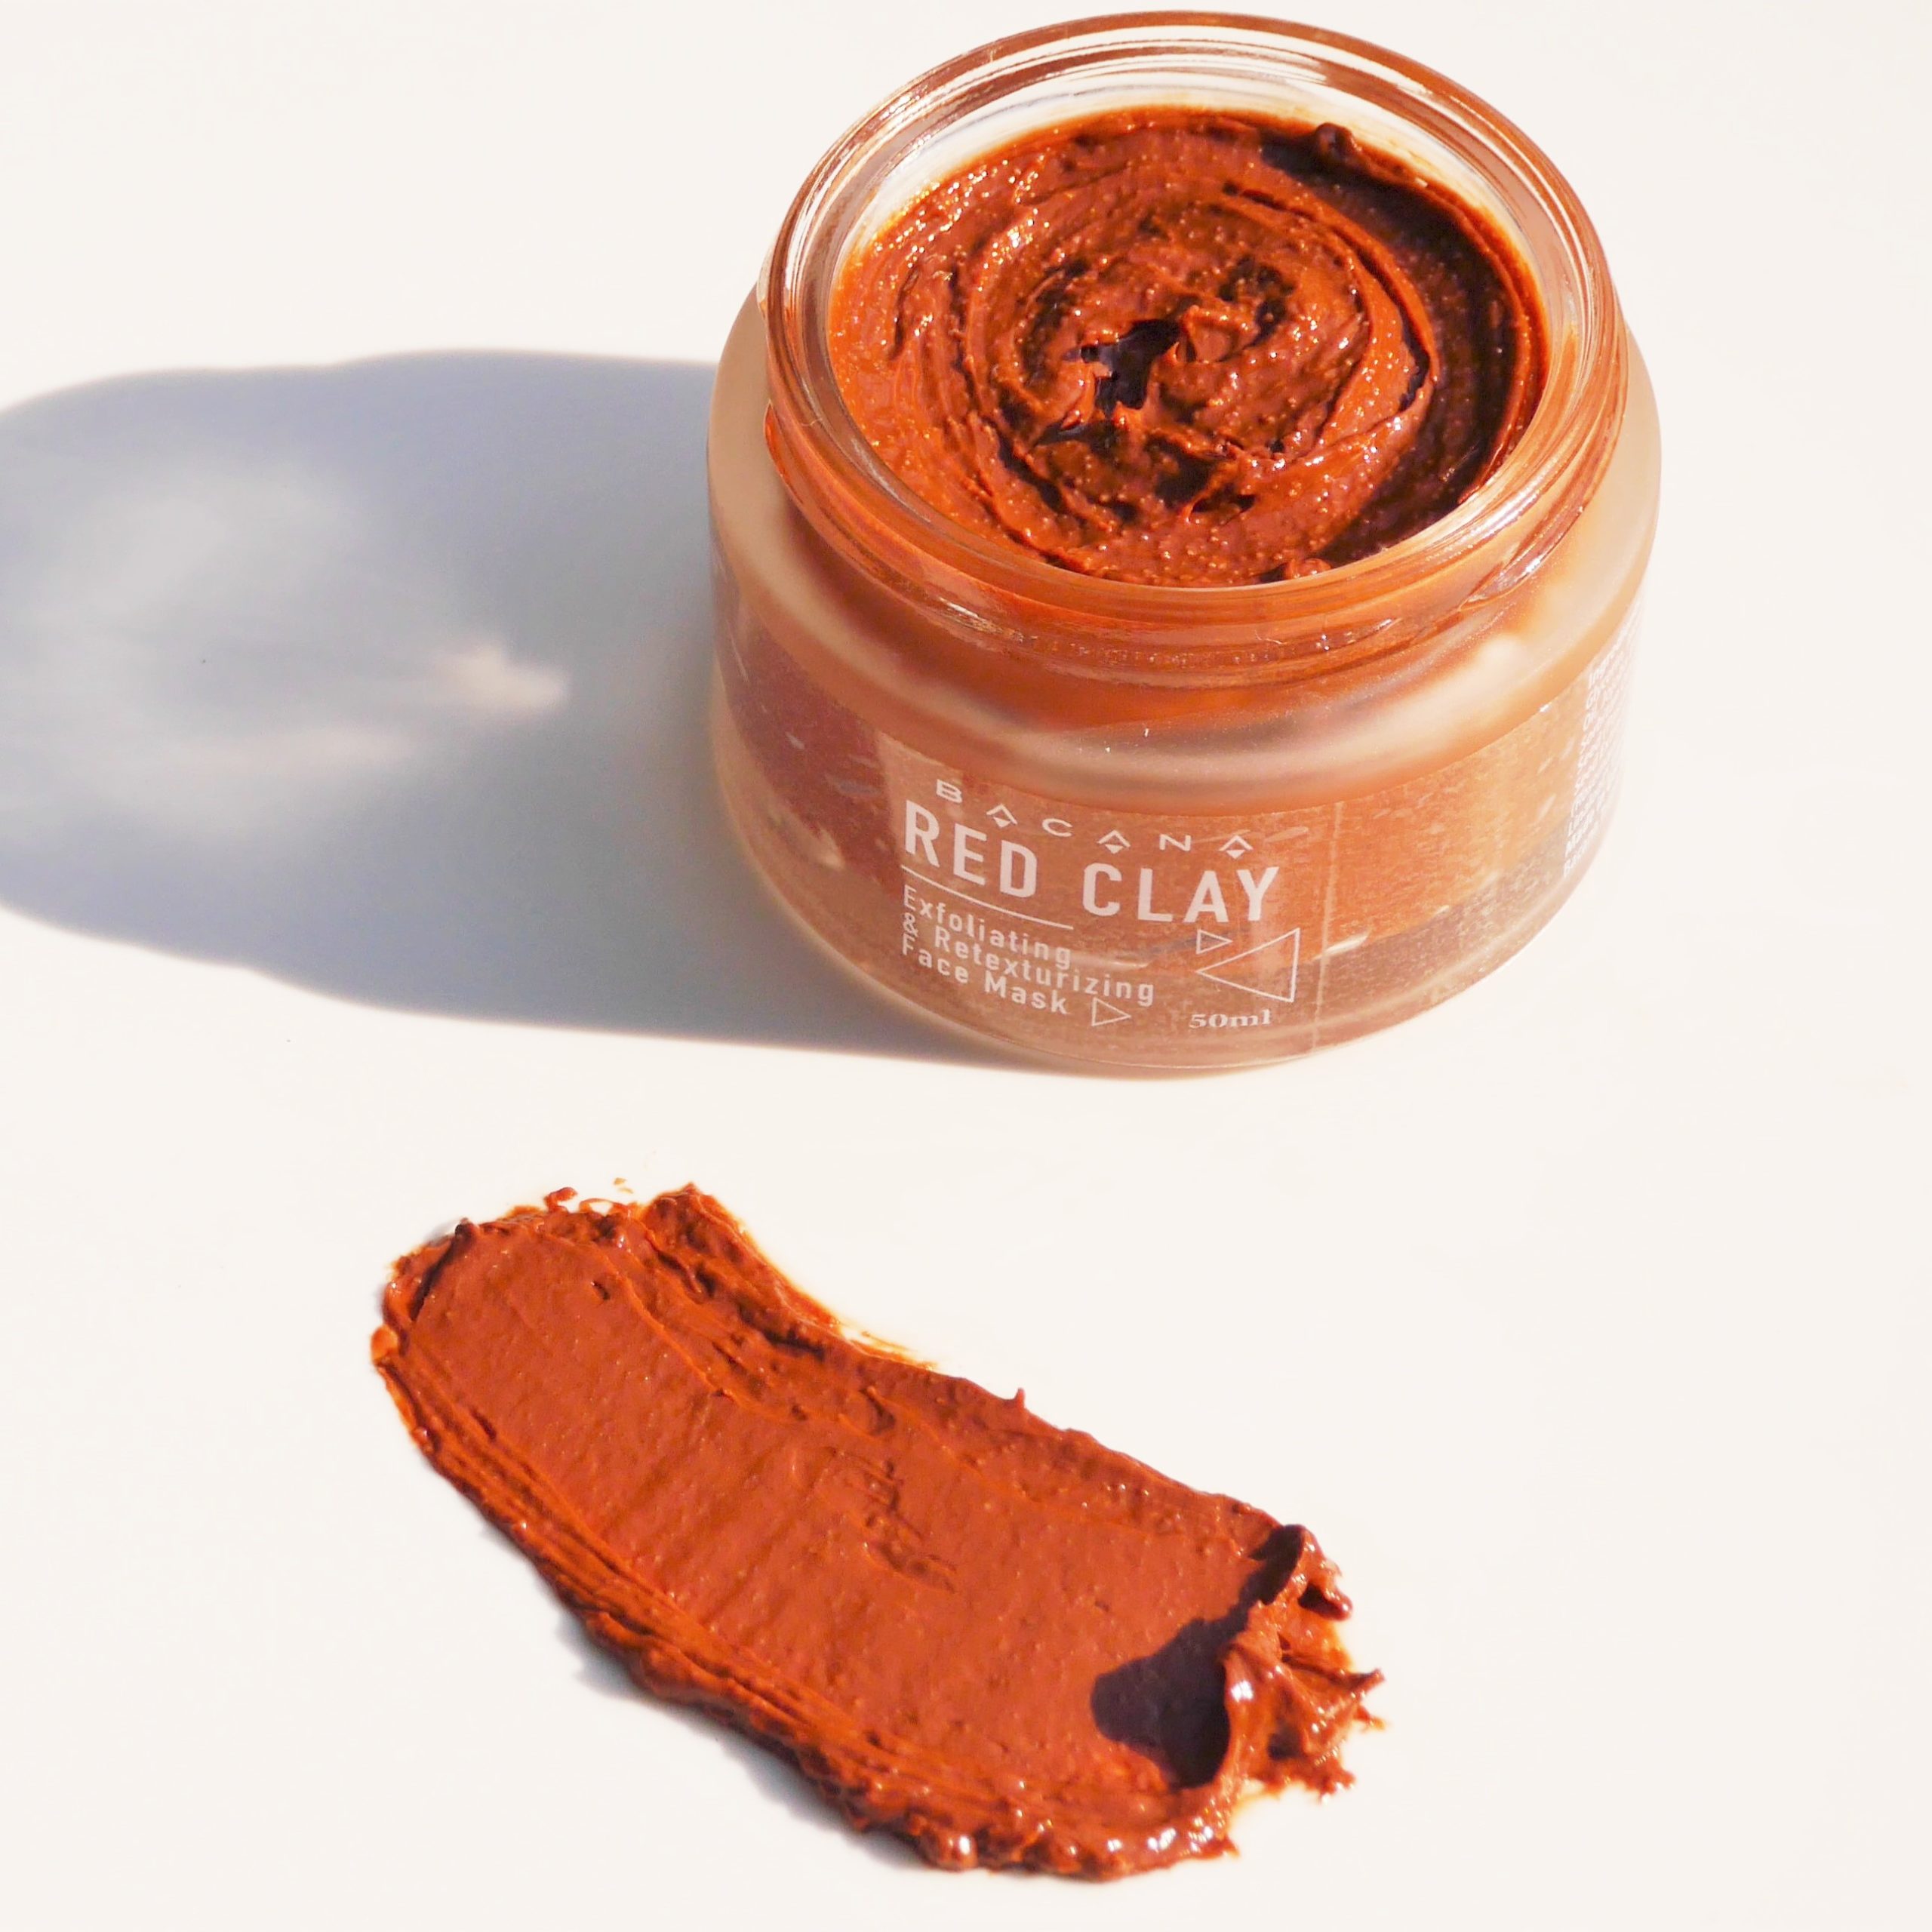 Red Clay Face Mask – Bacana Skincare